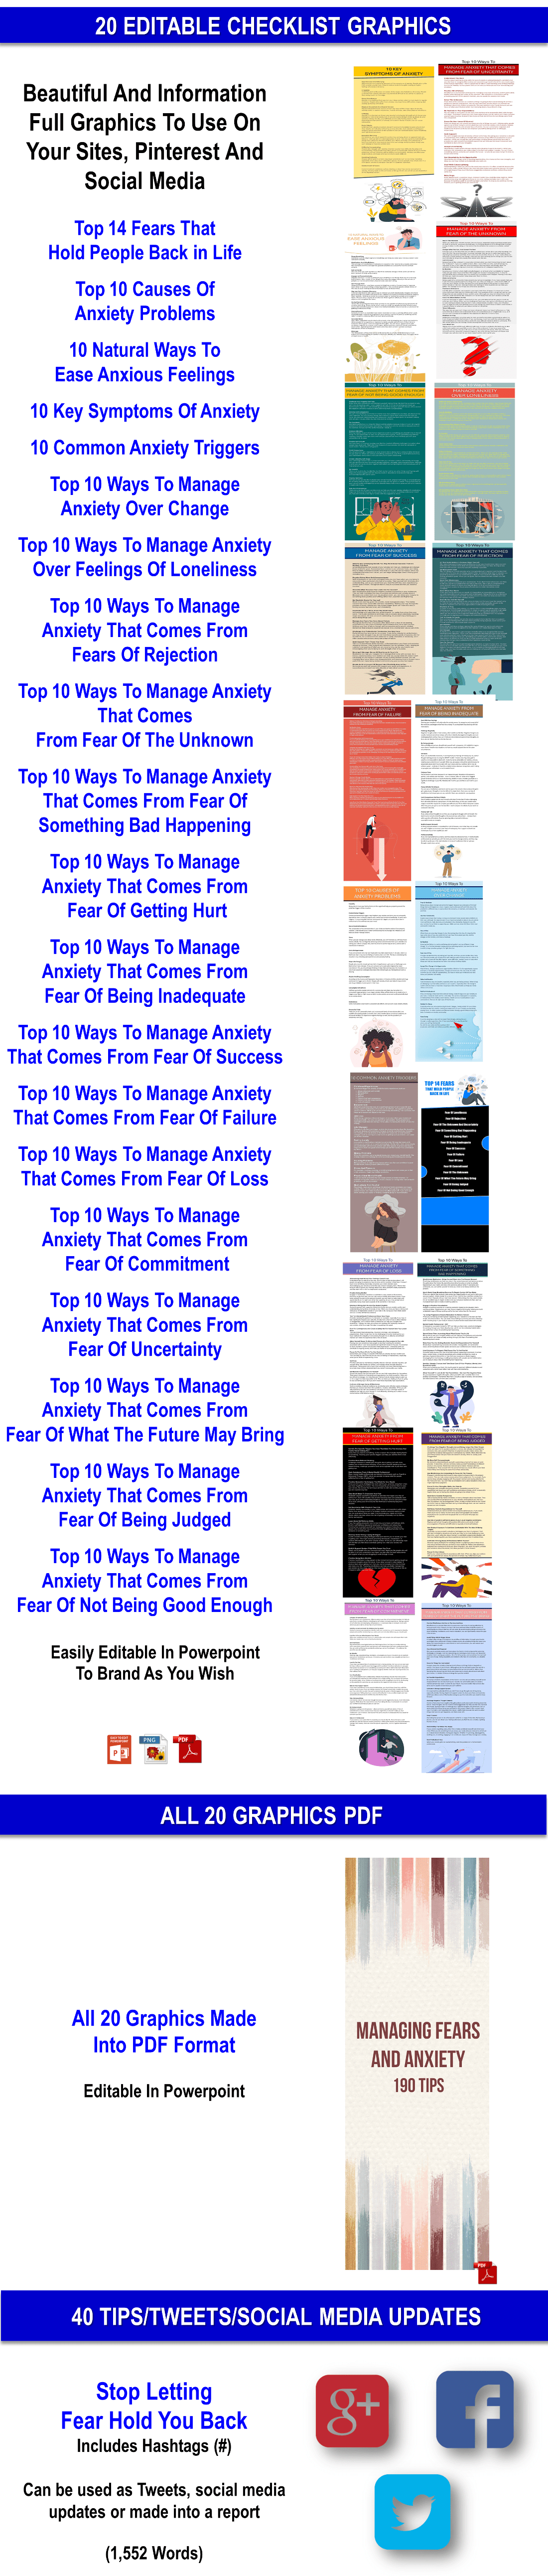 Top 14 Fears That Hold People Back in Life And Managing The Anxiety Content with PLR Rights